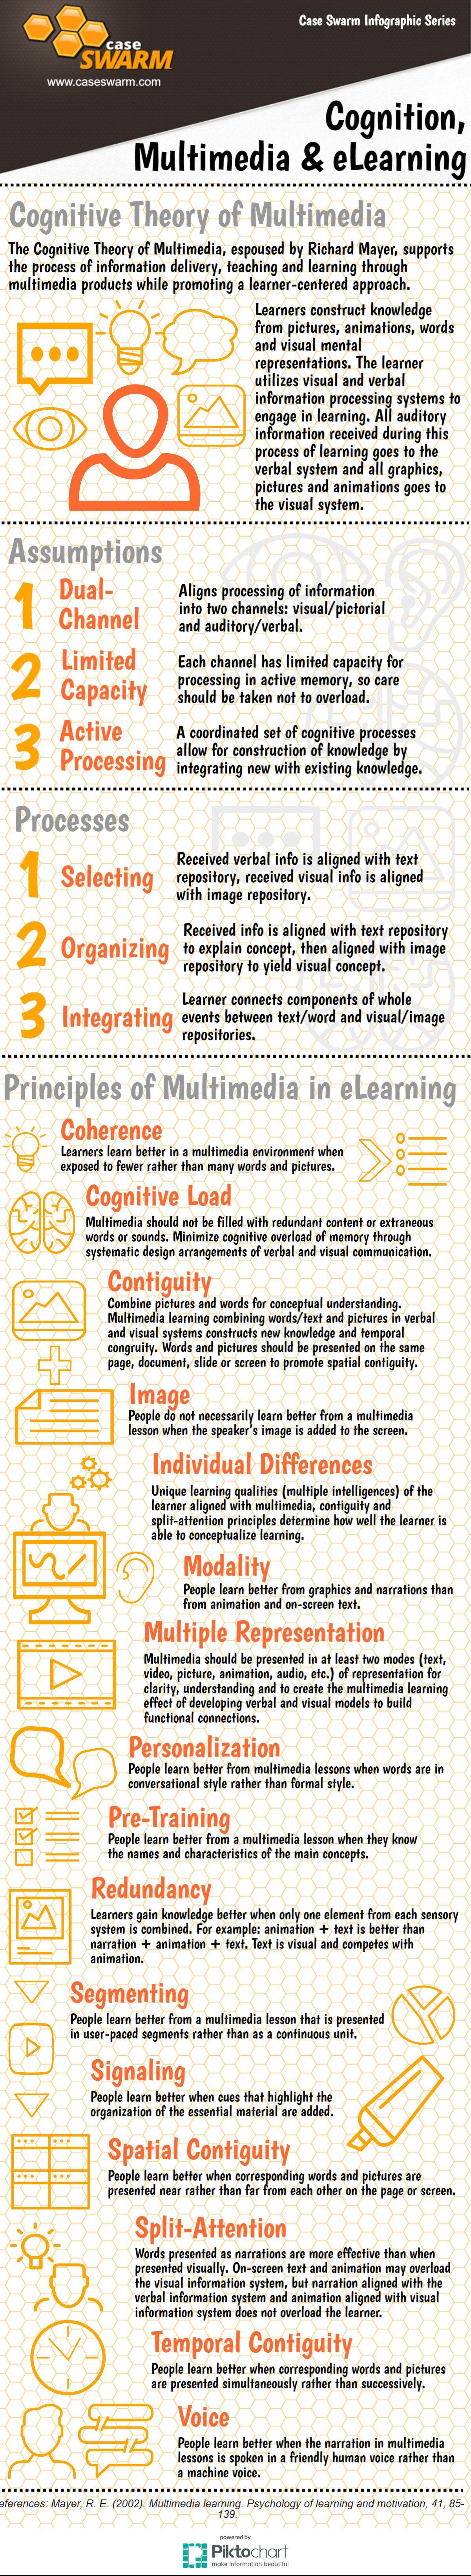 Infographic - Cognition, Multimedia and eLearning